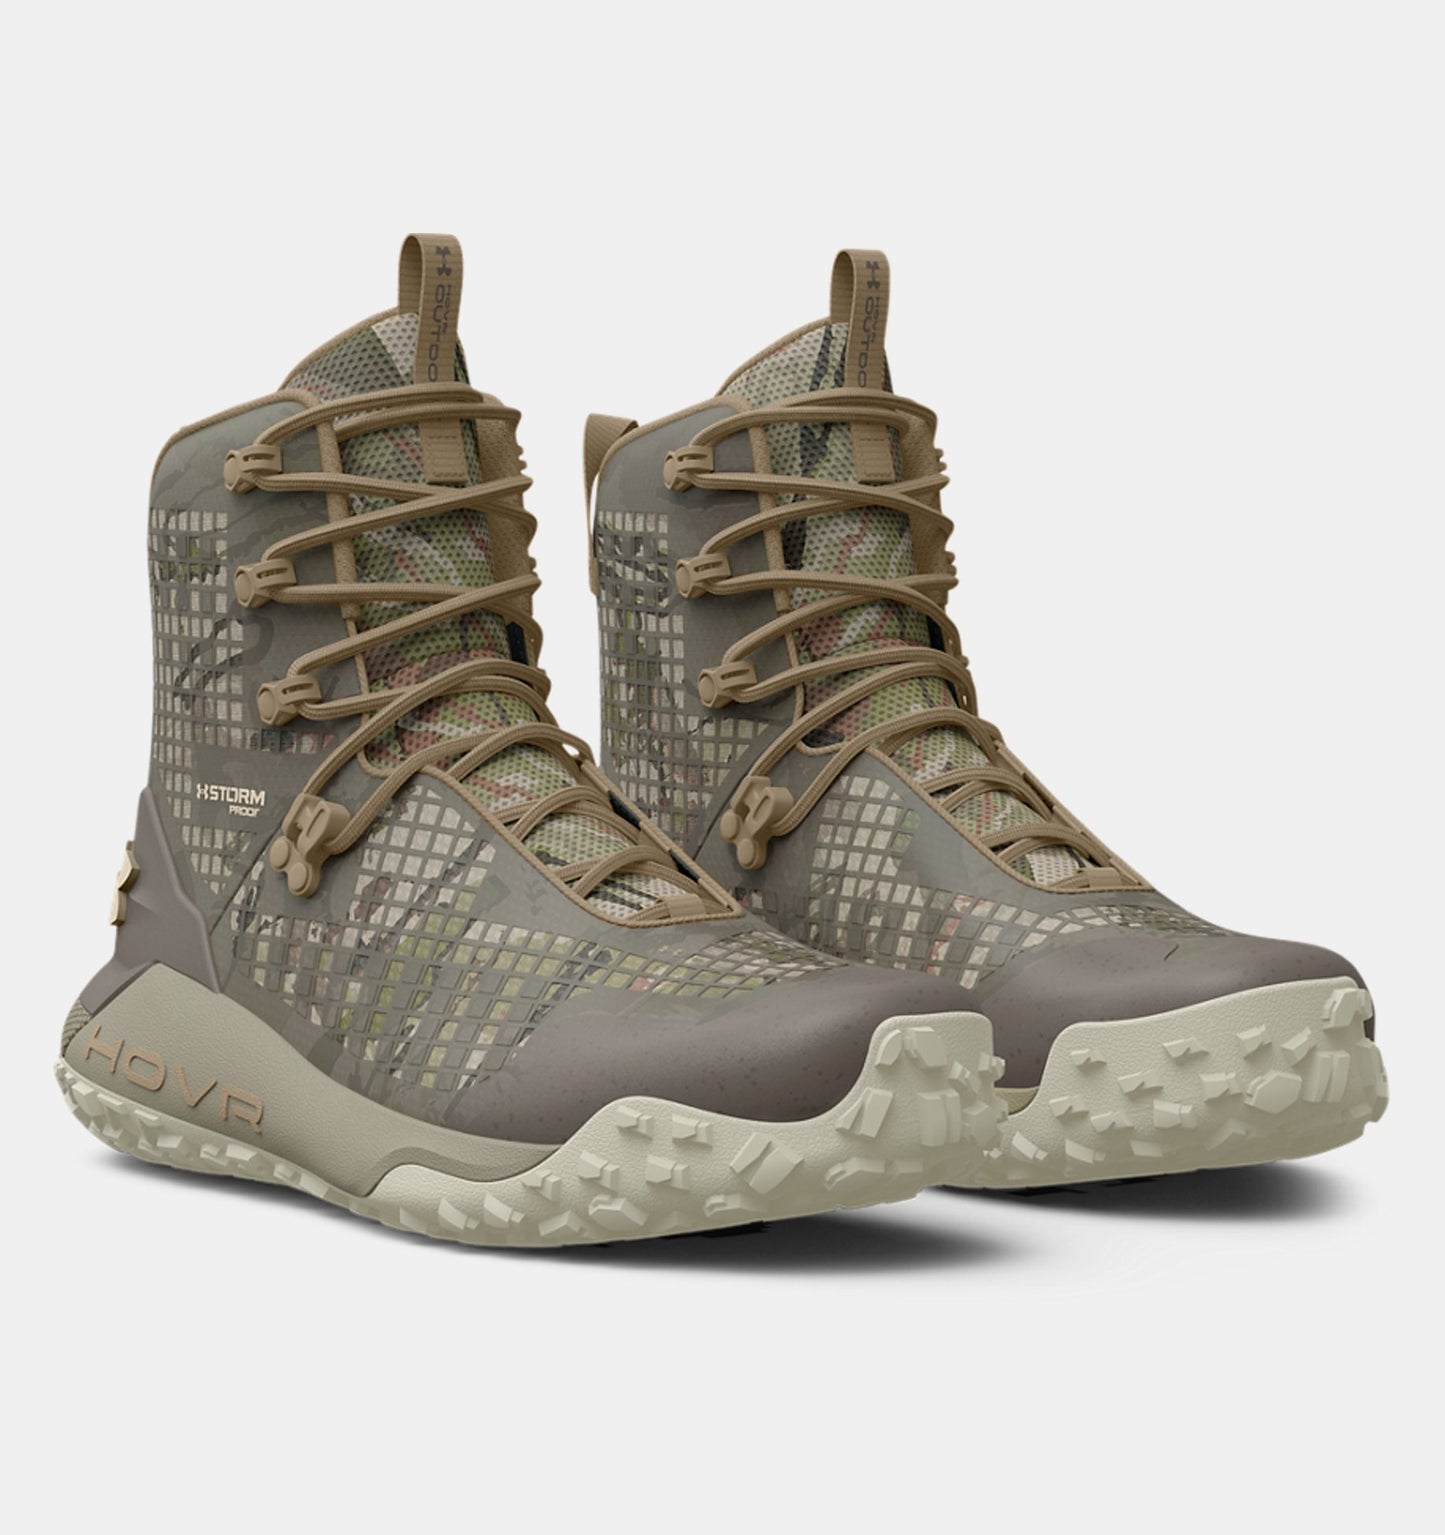 Under Armour HOVR™ Dawn Waterproof 2.0 Boots - 3025573-900